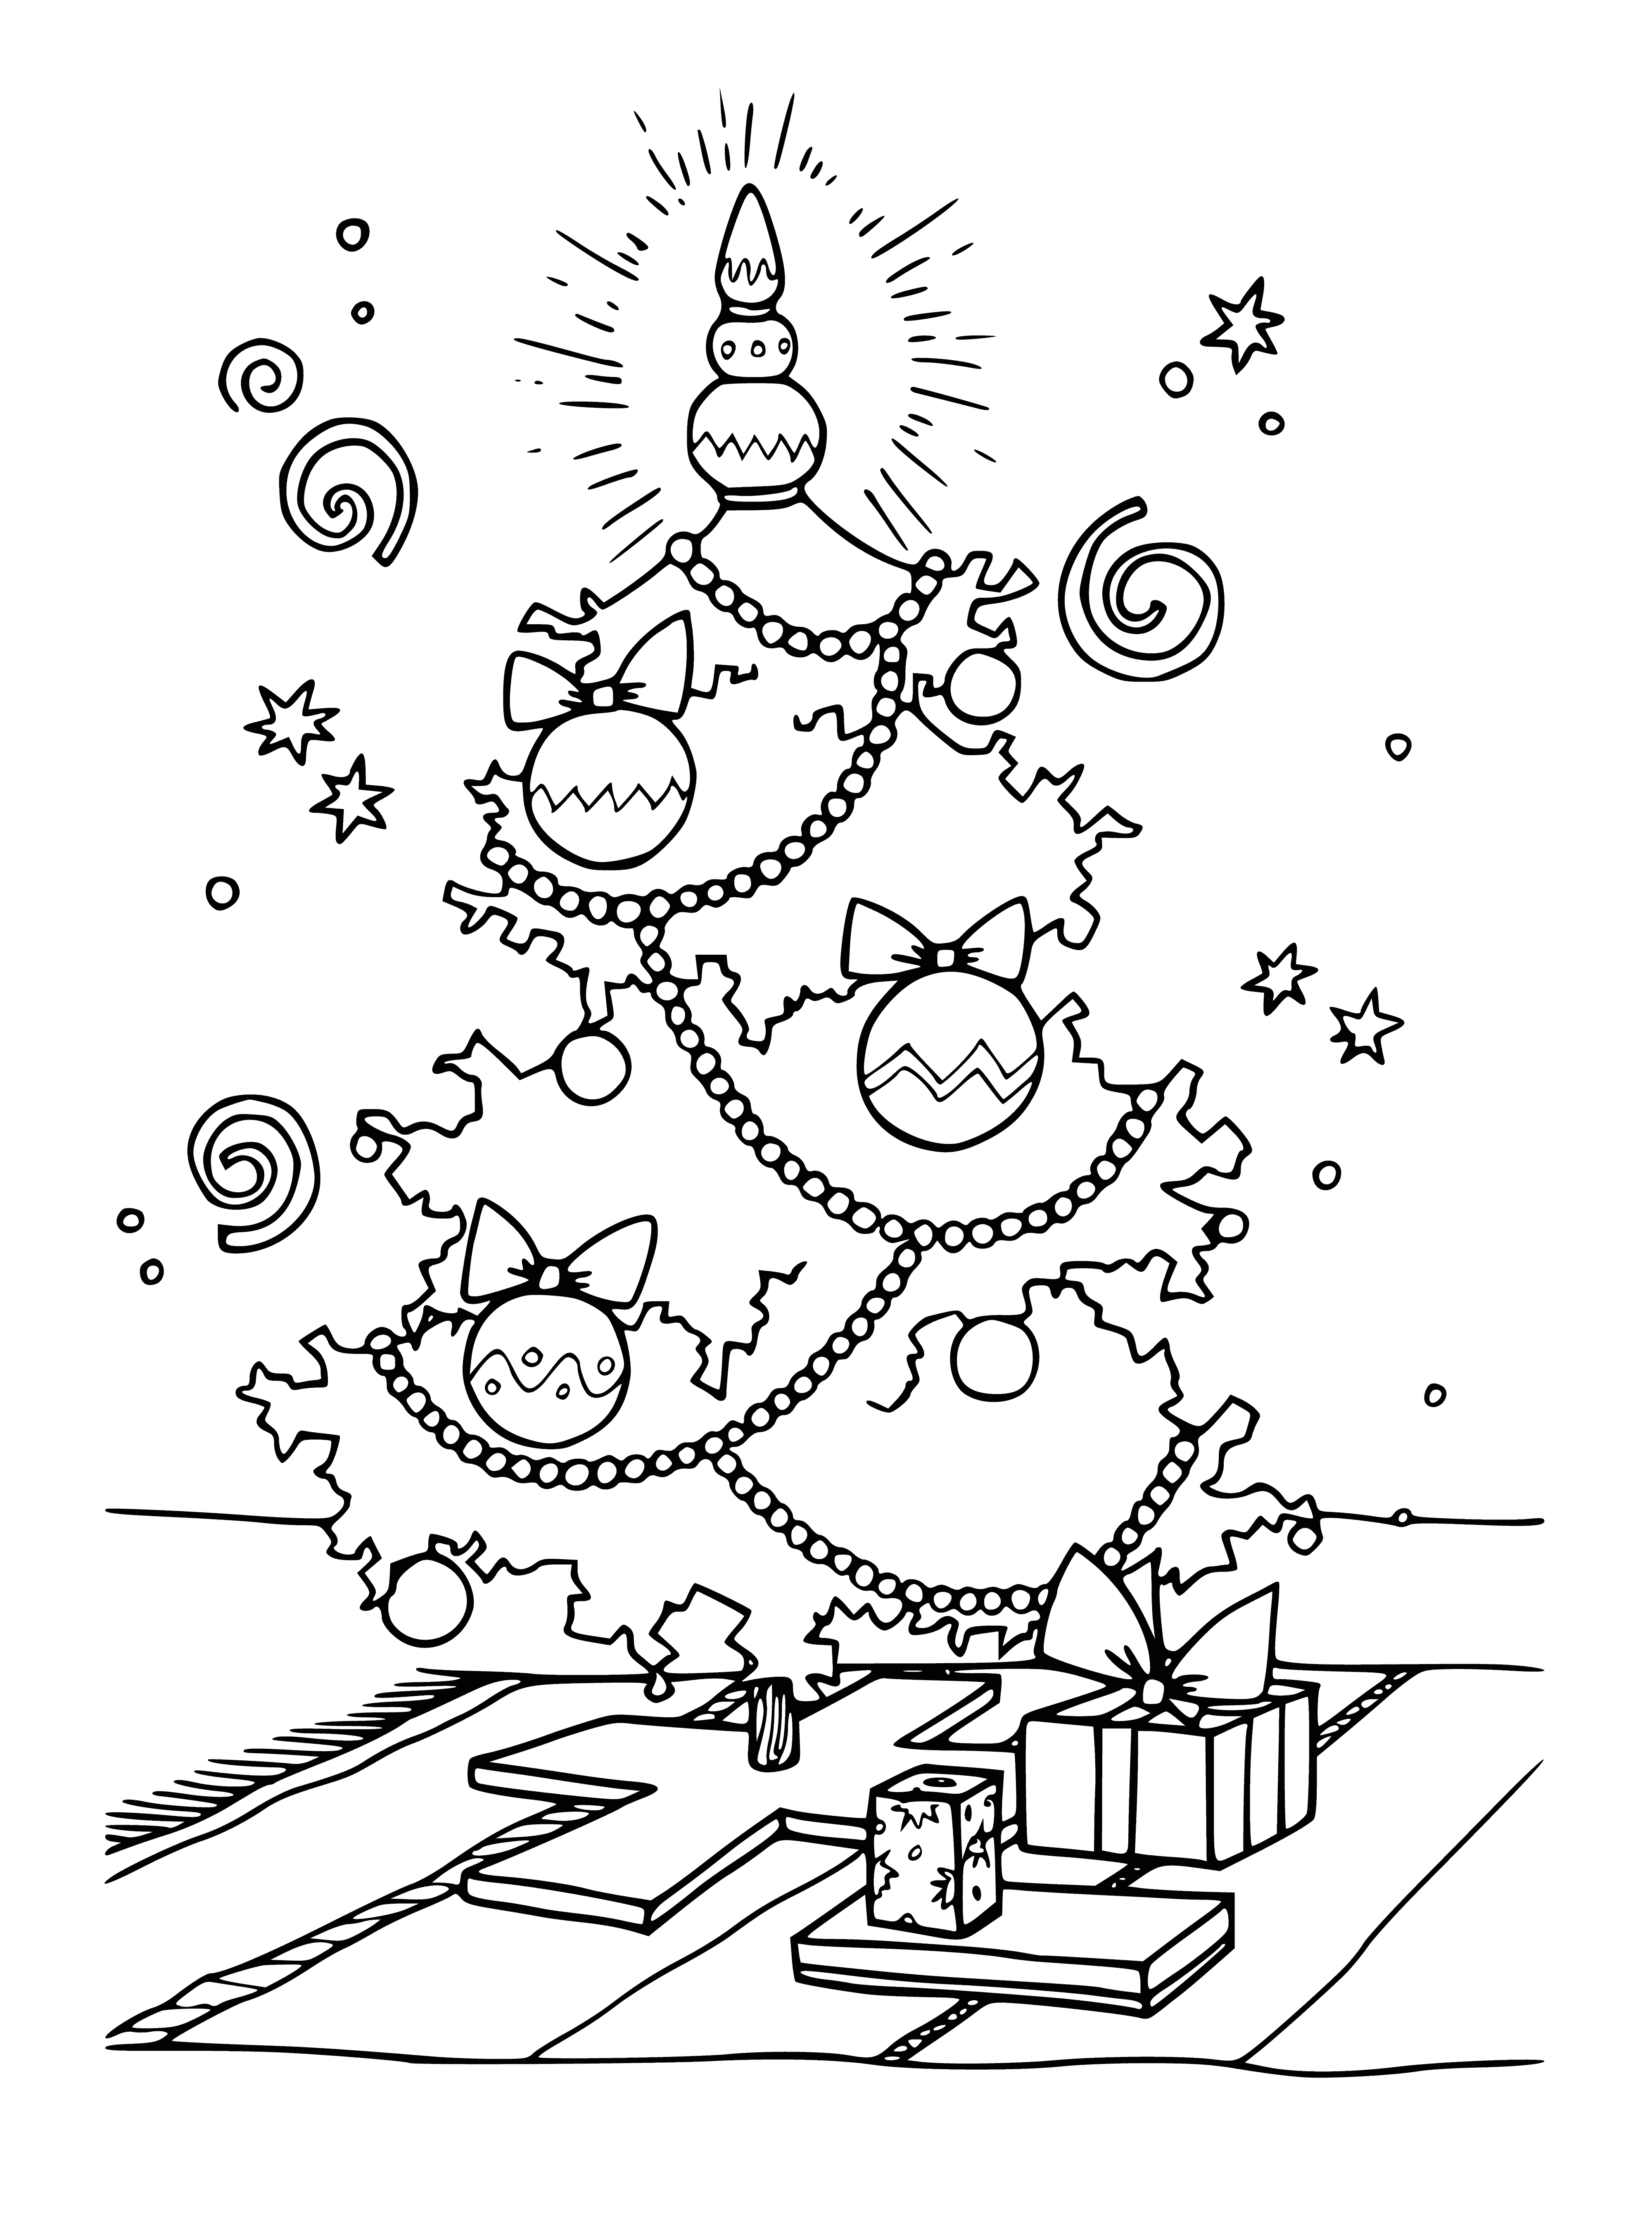 coloring page: Merry Christmas! A tree adorned with festive red, blue and gold ornaments, surrounded by presents. #Xmas #holidaycheer